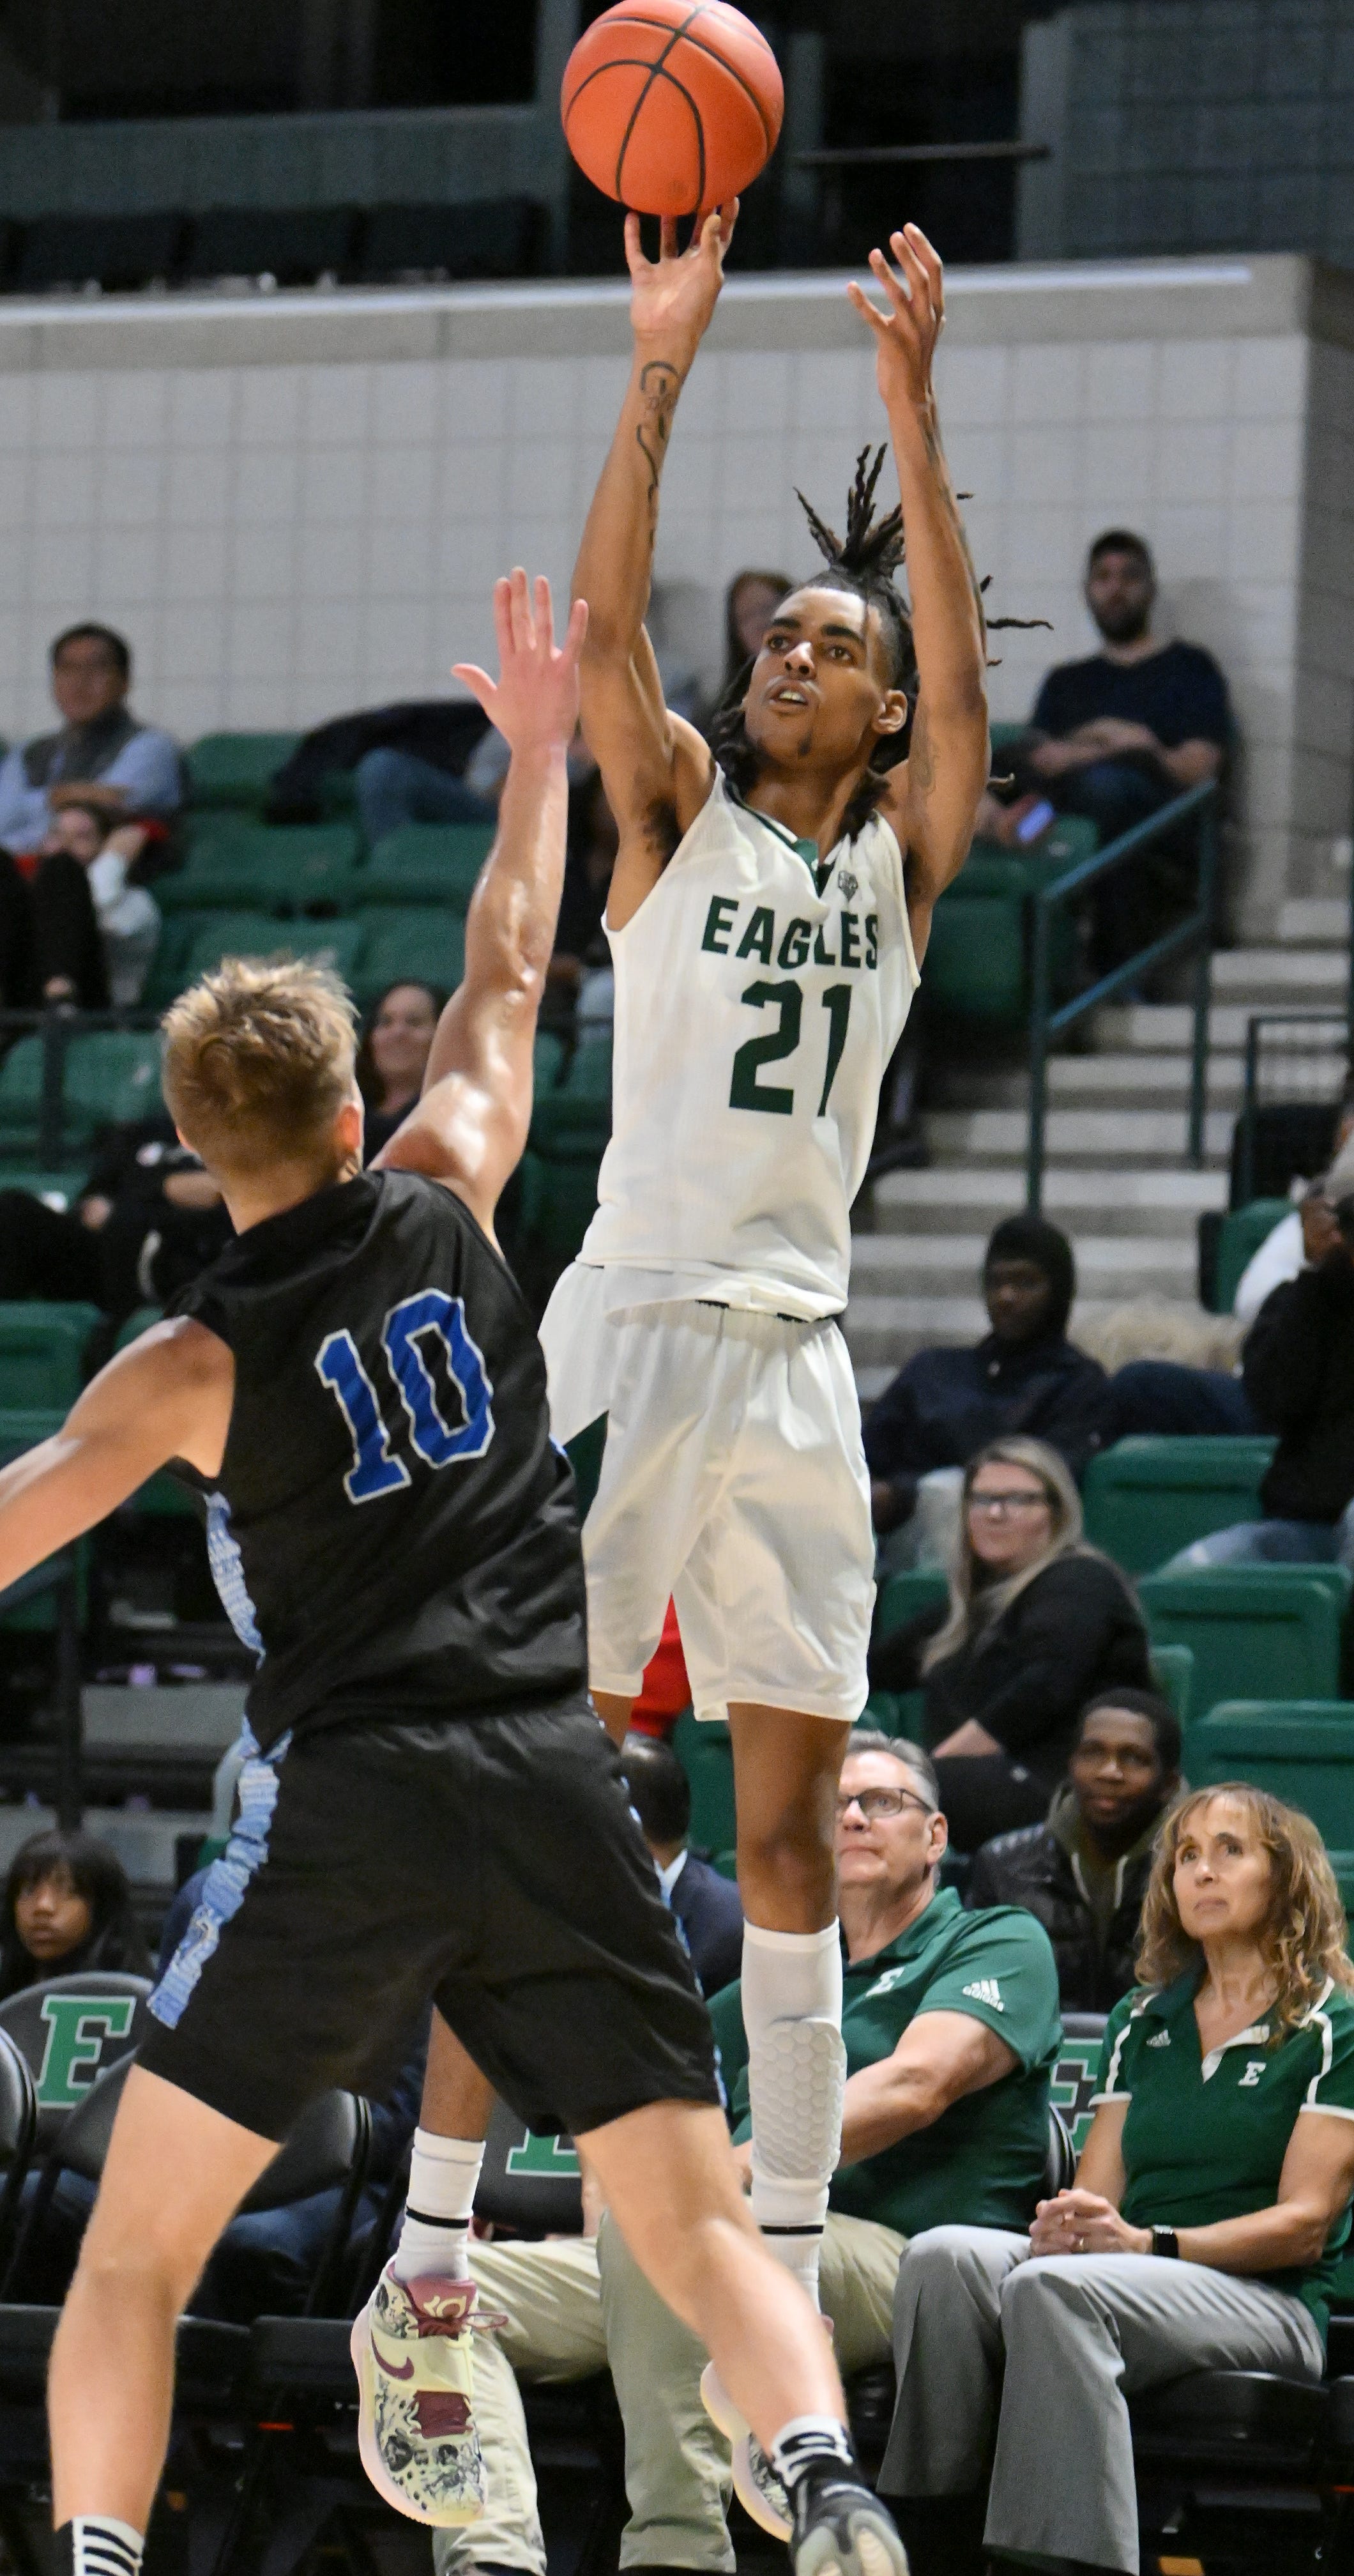 Eastern guard Emoni Bates (21) shoots over Grand Valley guard Luke Toliver (10) in the first half.  Eastern vs Grand Valley in men's basketball exhibition at George Gervin GameAbove Center at Eastern Michigan University in Ypsilanti, Mich. on Oct. 27, 2022.